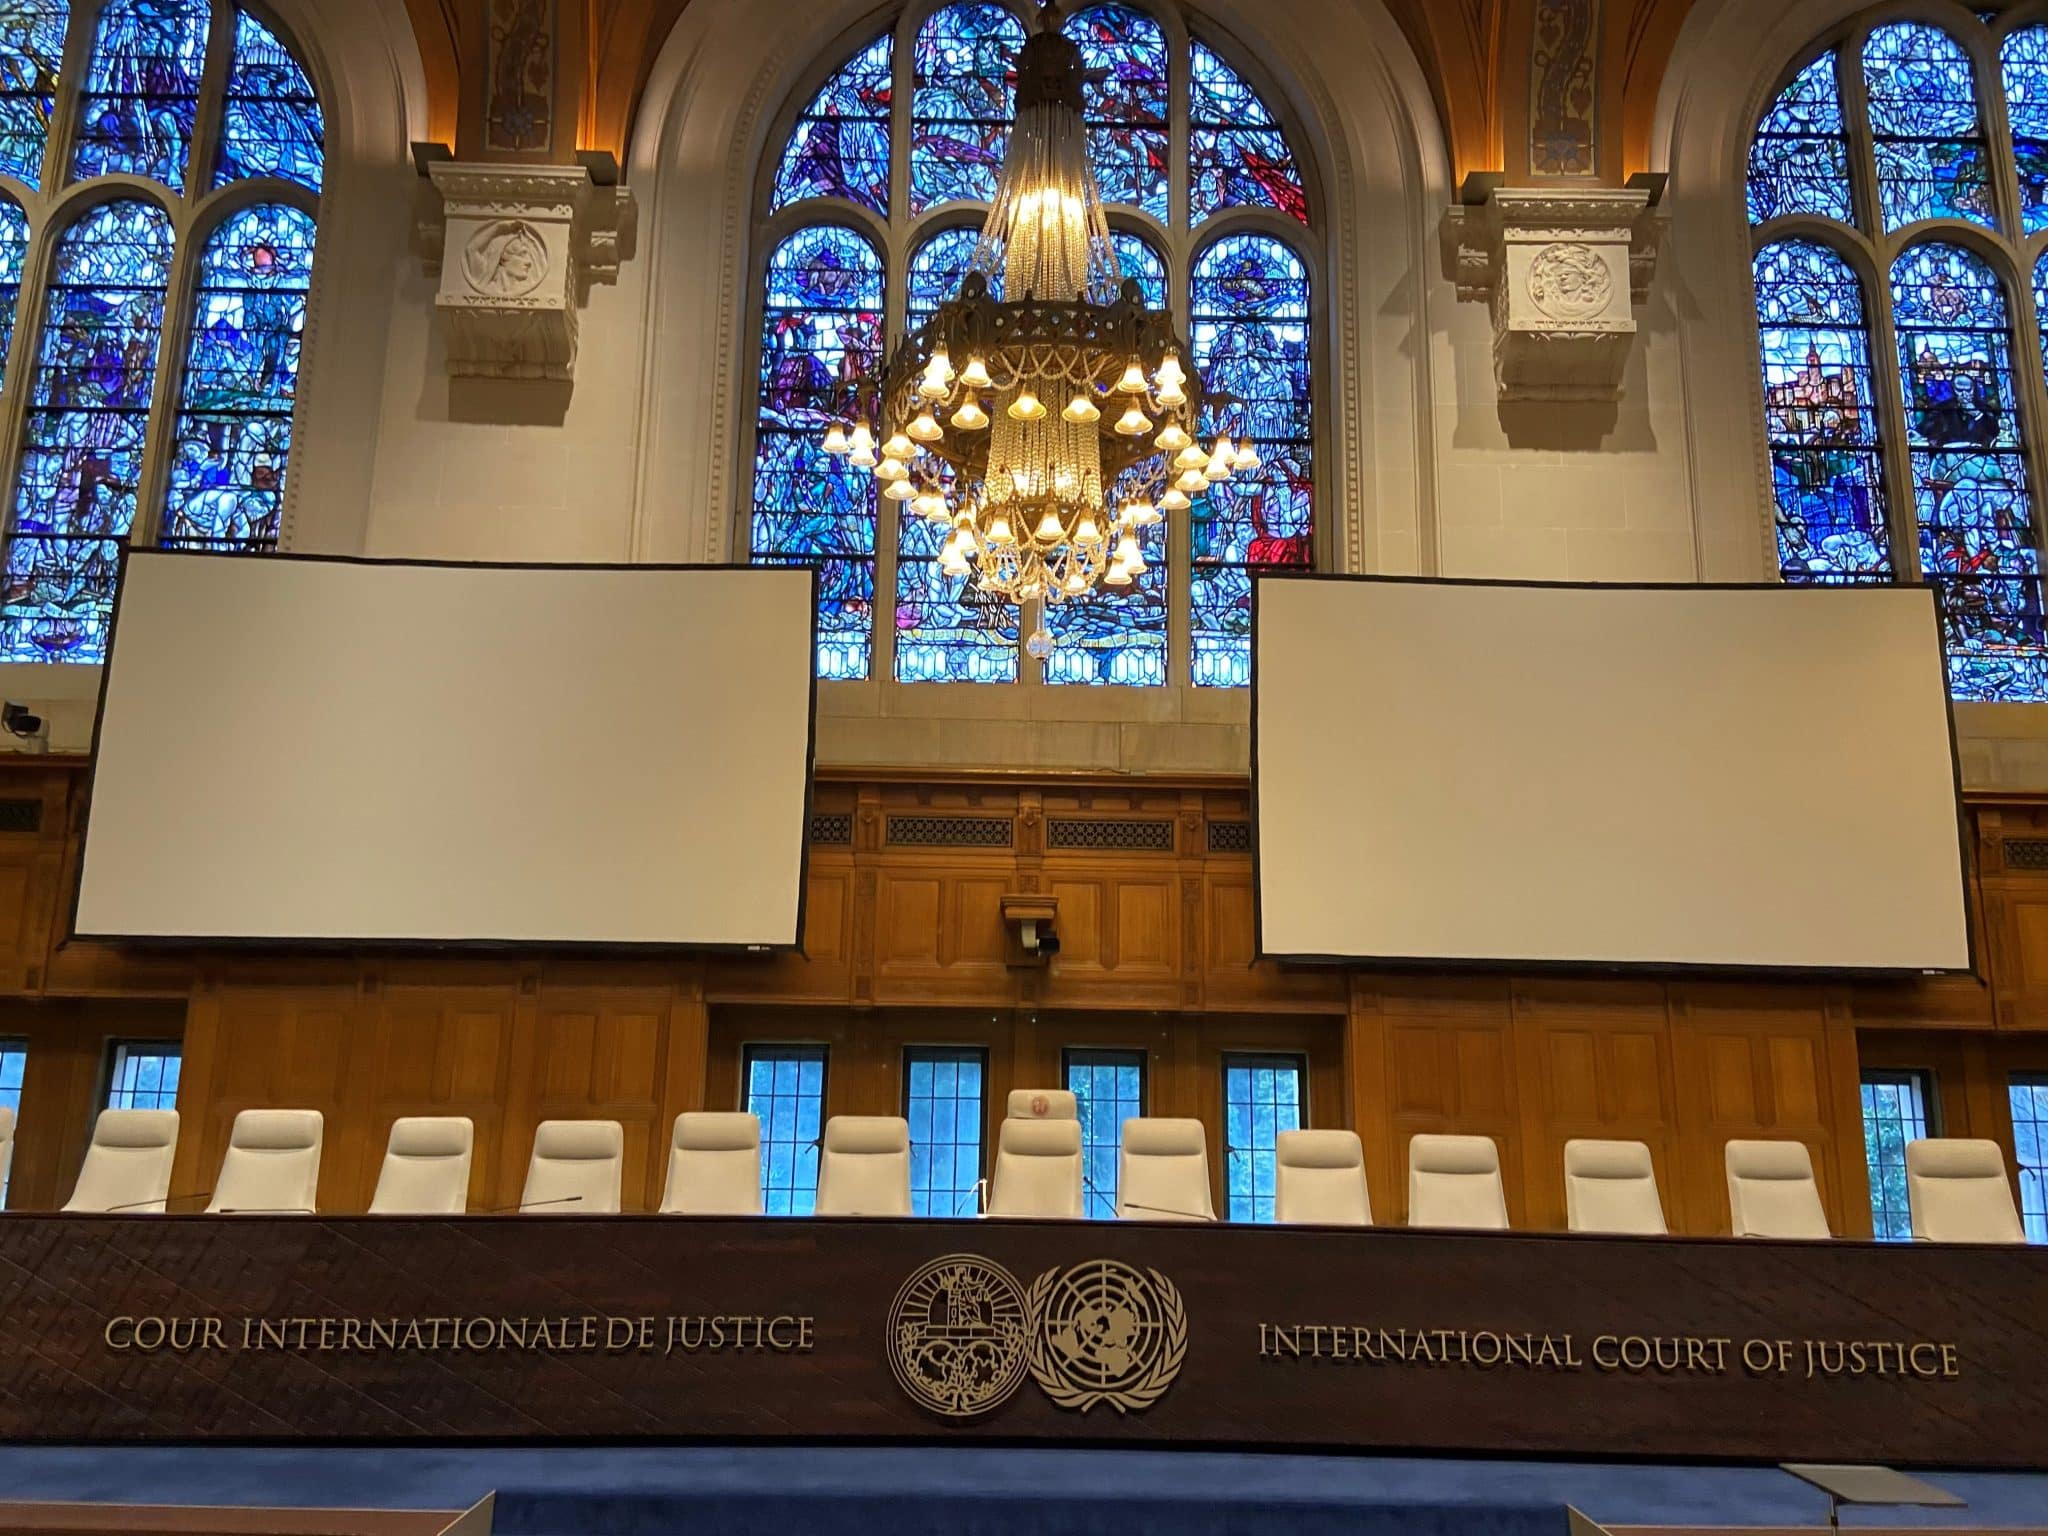 Inside the International Court of Justice building in the Hague